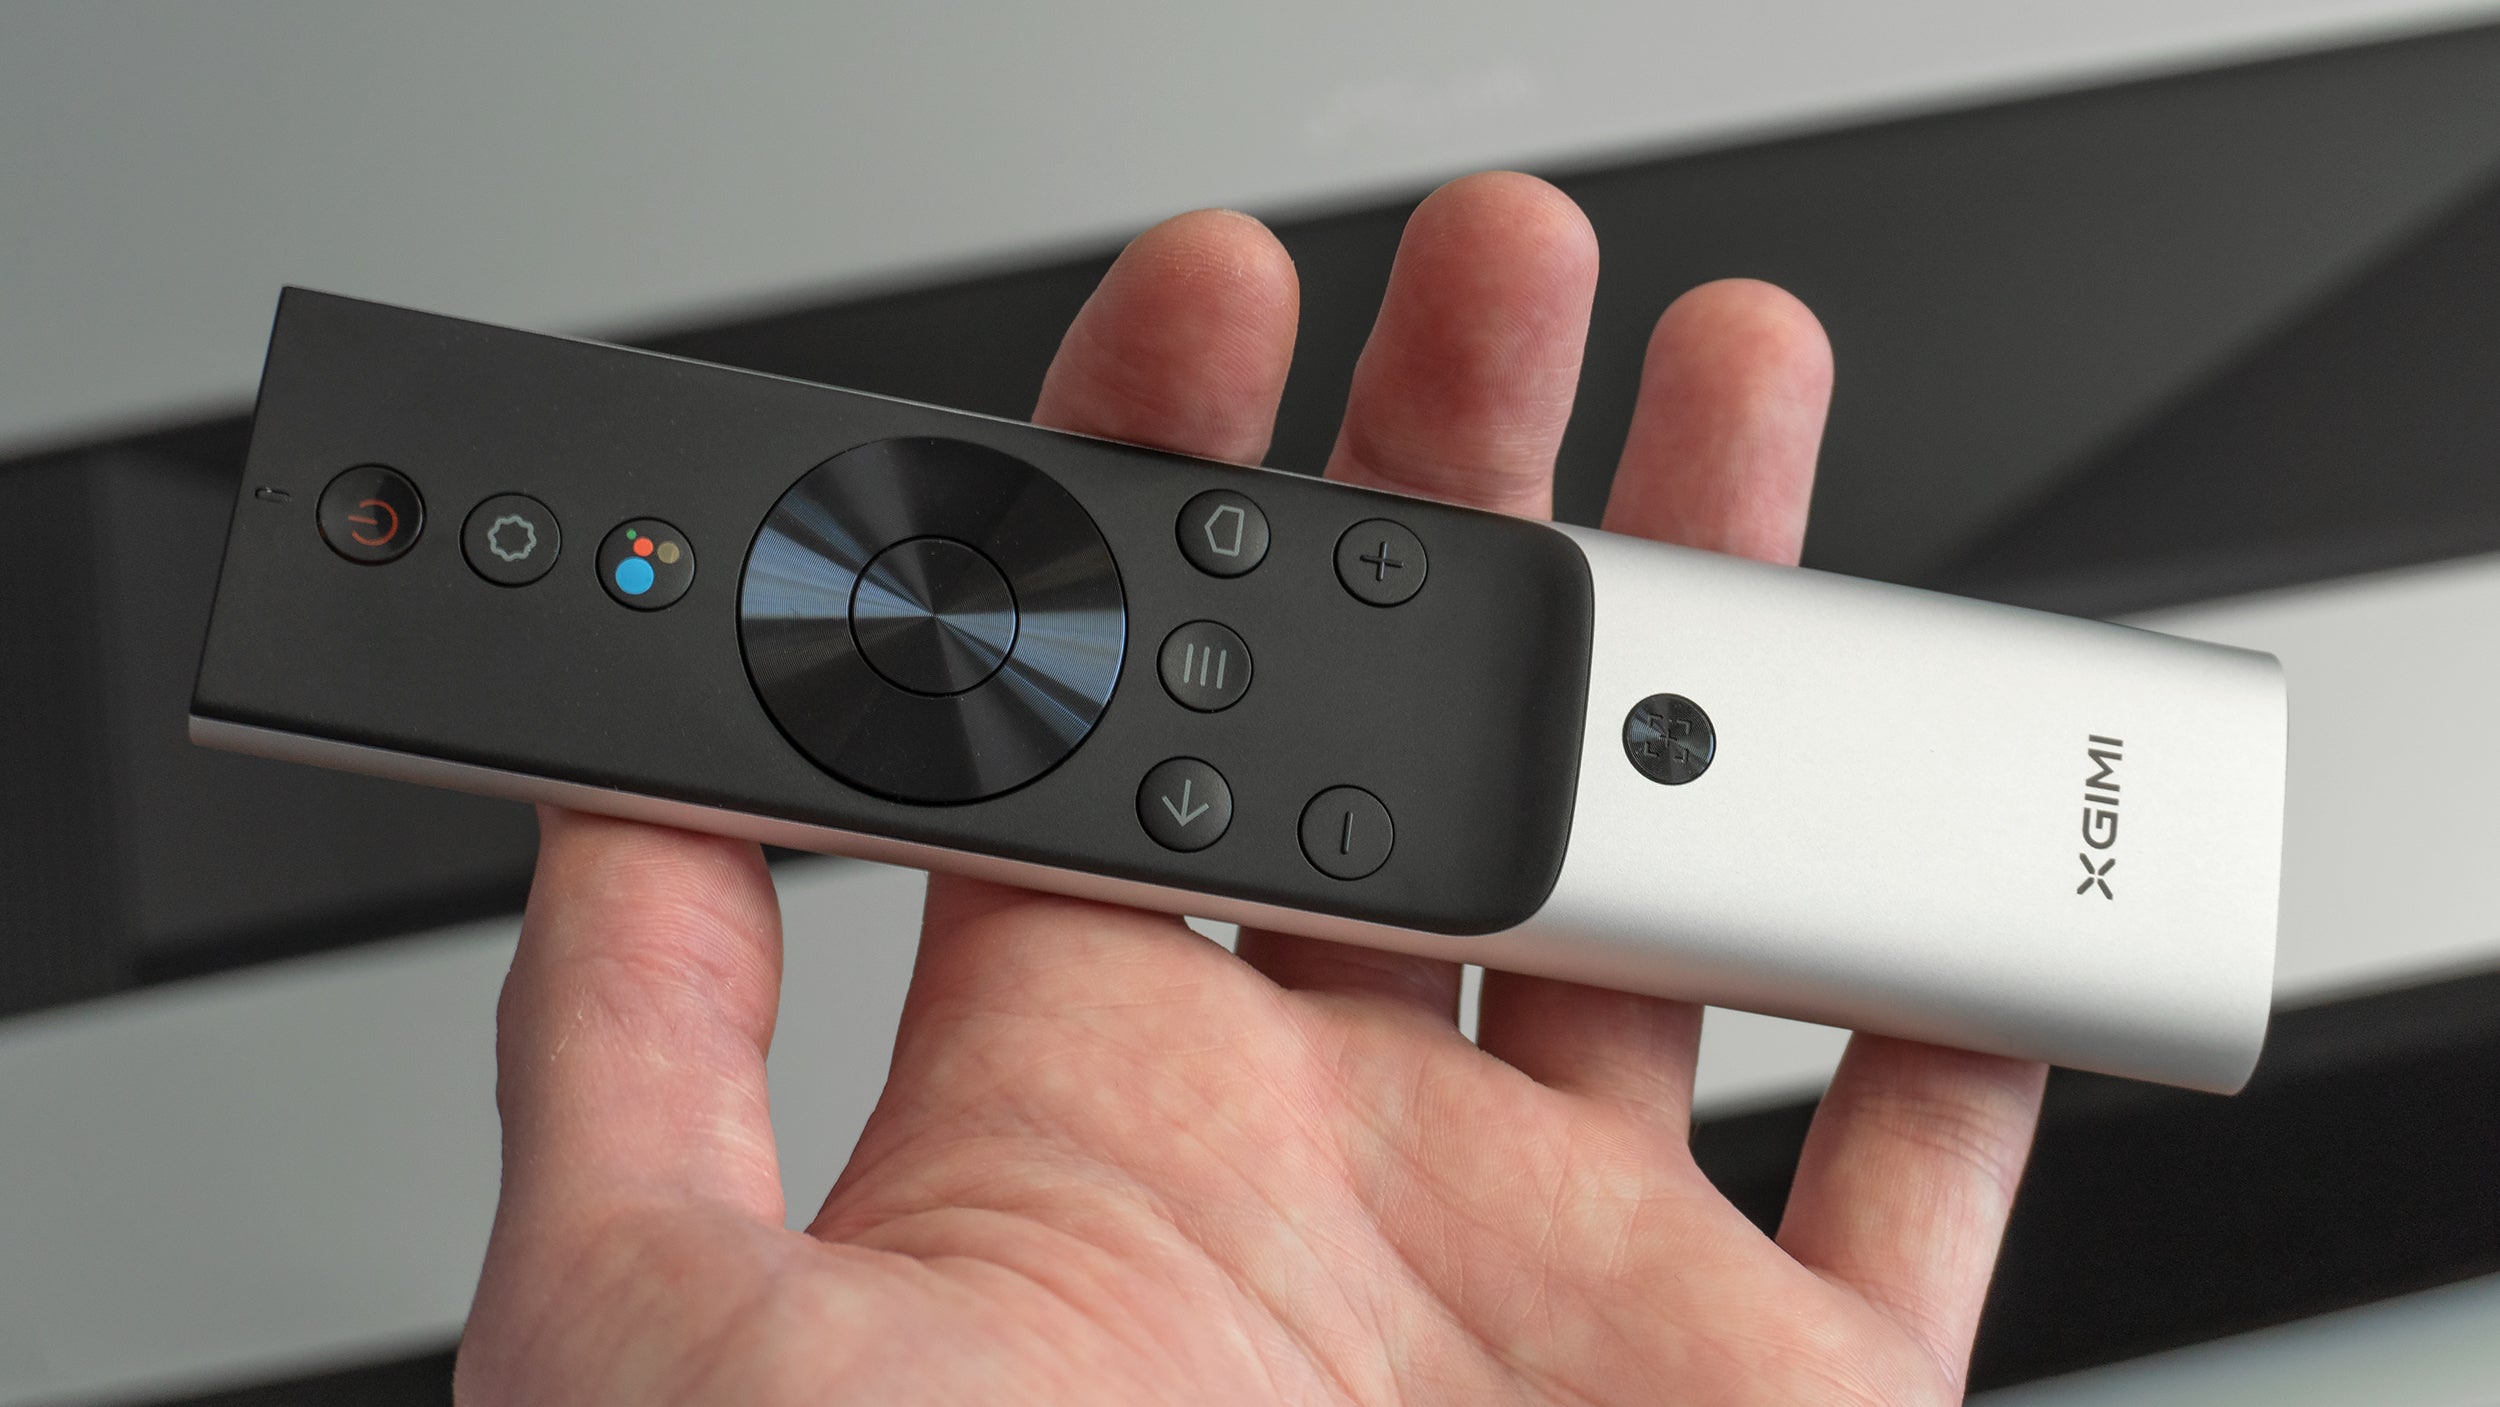 One of the best projector remotes I've tested, with shortcut buttons for key functions like focus and quickly accessing the projector's settings. (Photo: Andrew Liszewski - Gizmodo)